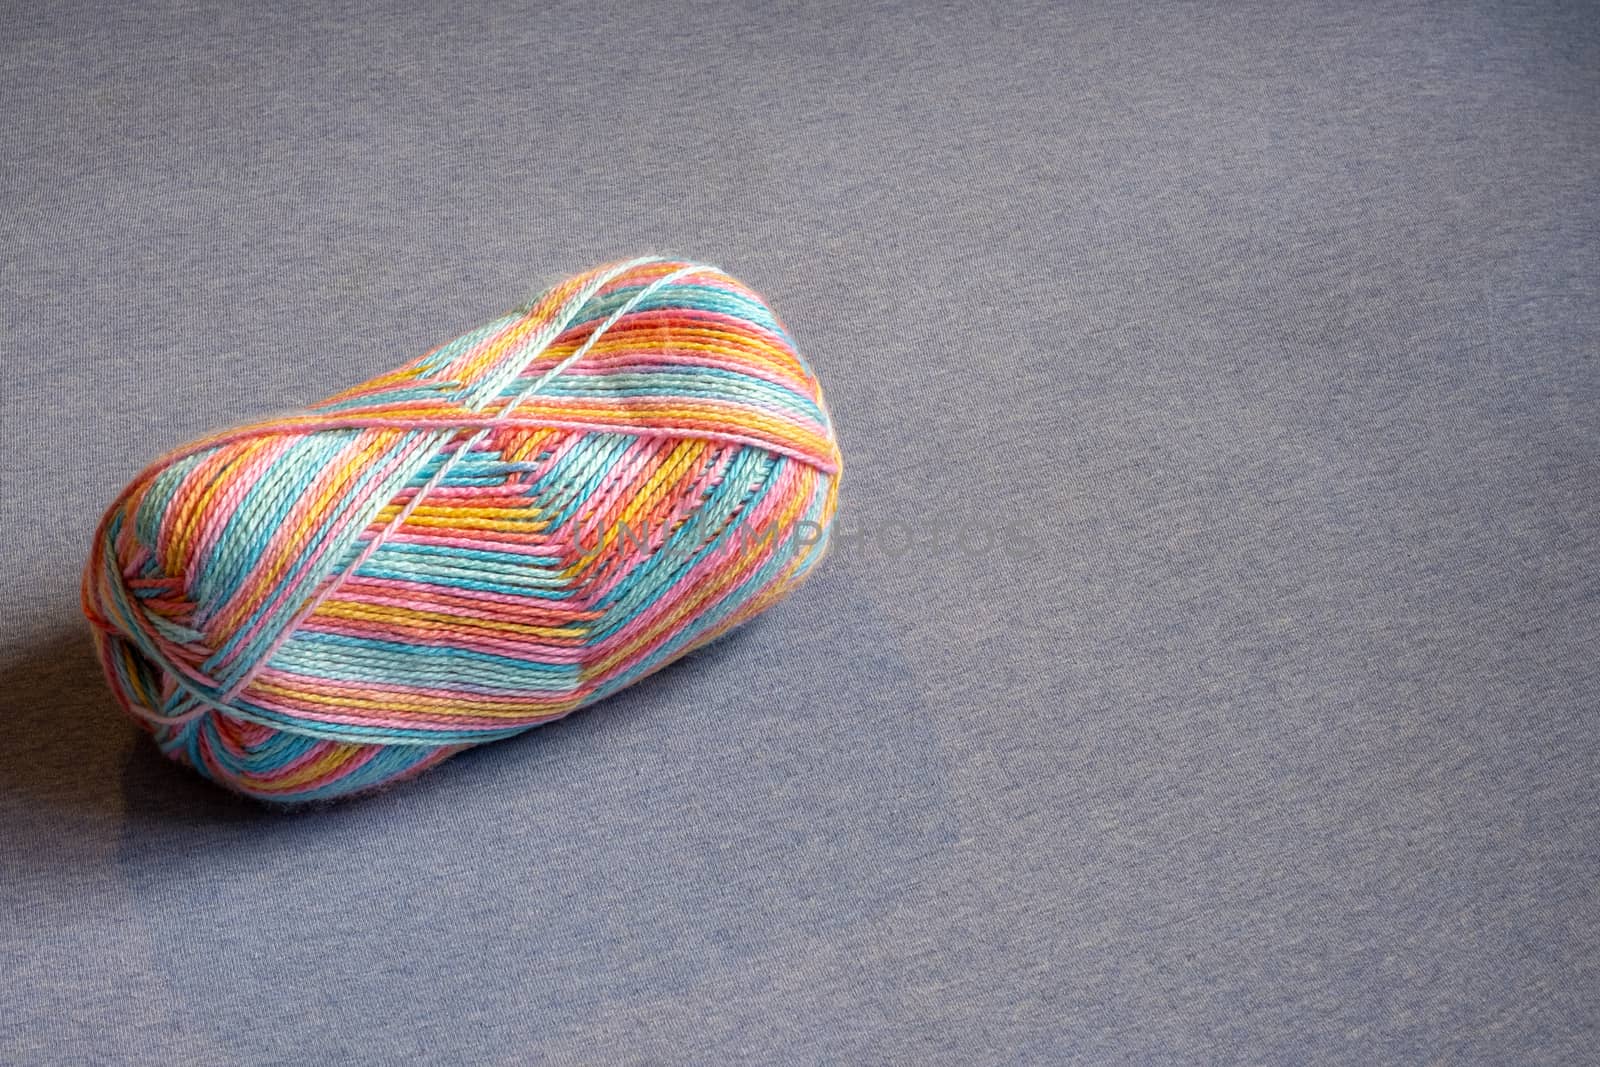 A skein of brightly-colored yarn has pink, blue and yellow coloring in a variety of shades.